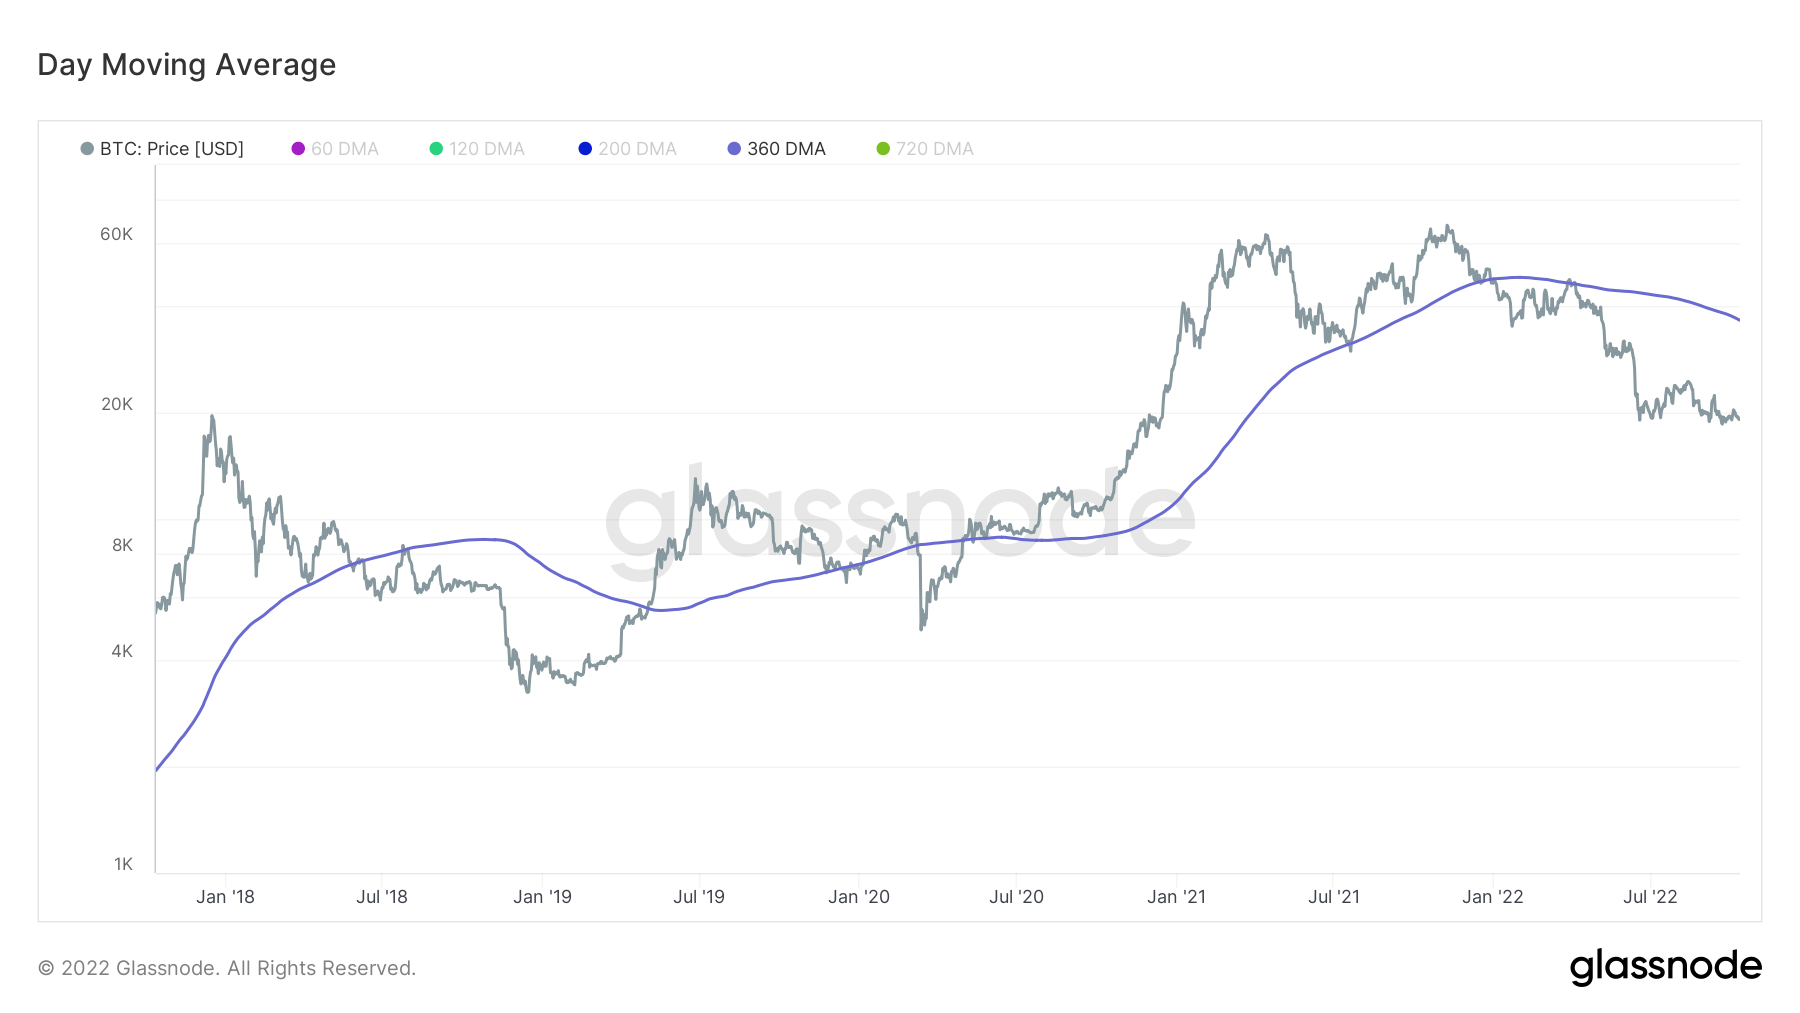 Bitcoin Daily Moving Average (Source: Glassnode)